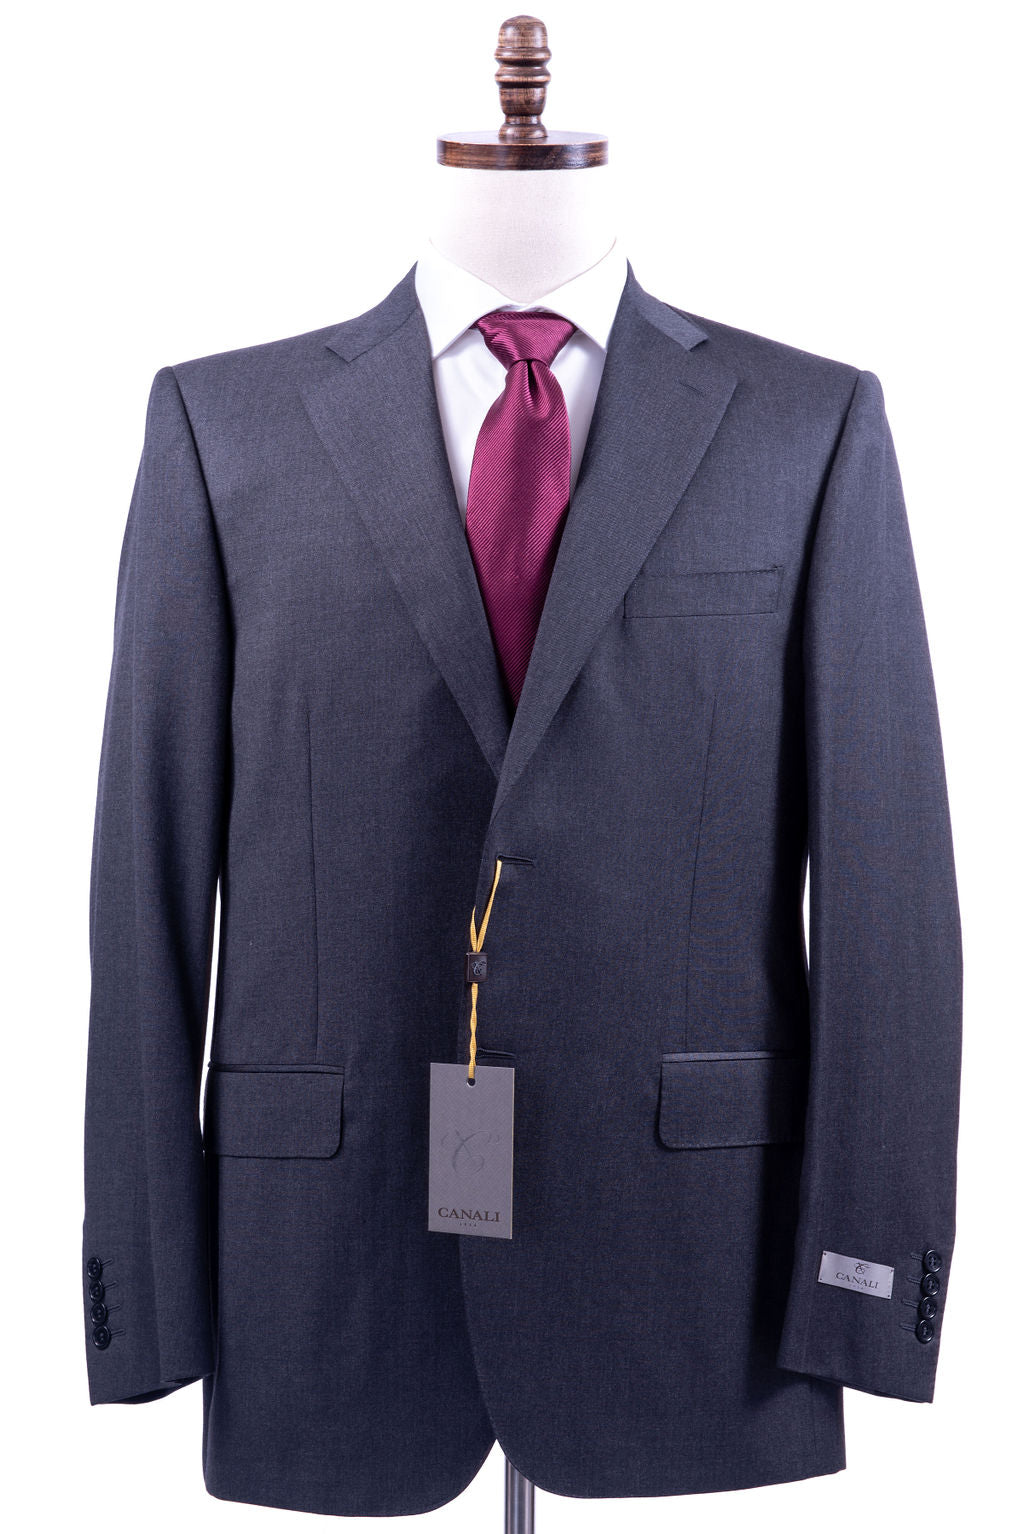 Canali 1934 Mens Solid Charocal Gray 42R Drop 6 100% Wool 2 Button 2 Piece Suit